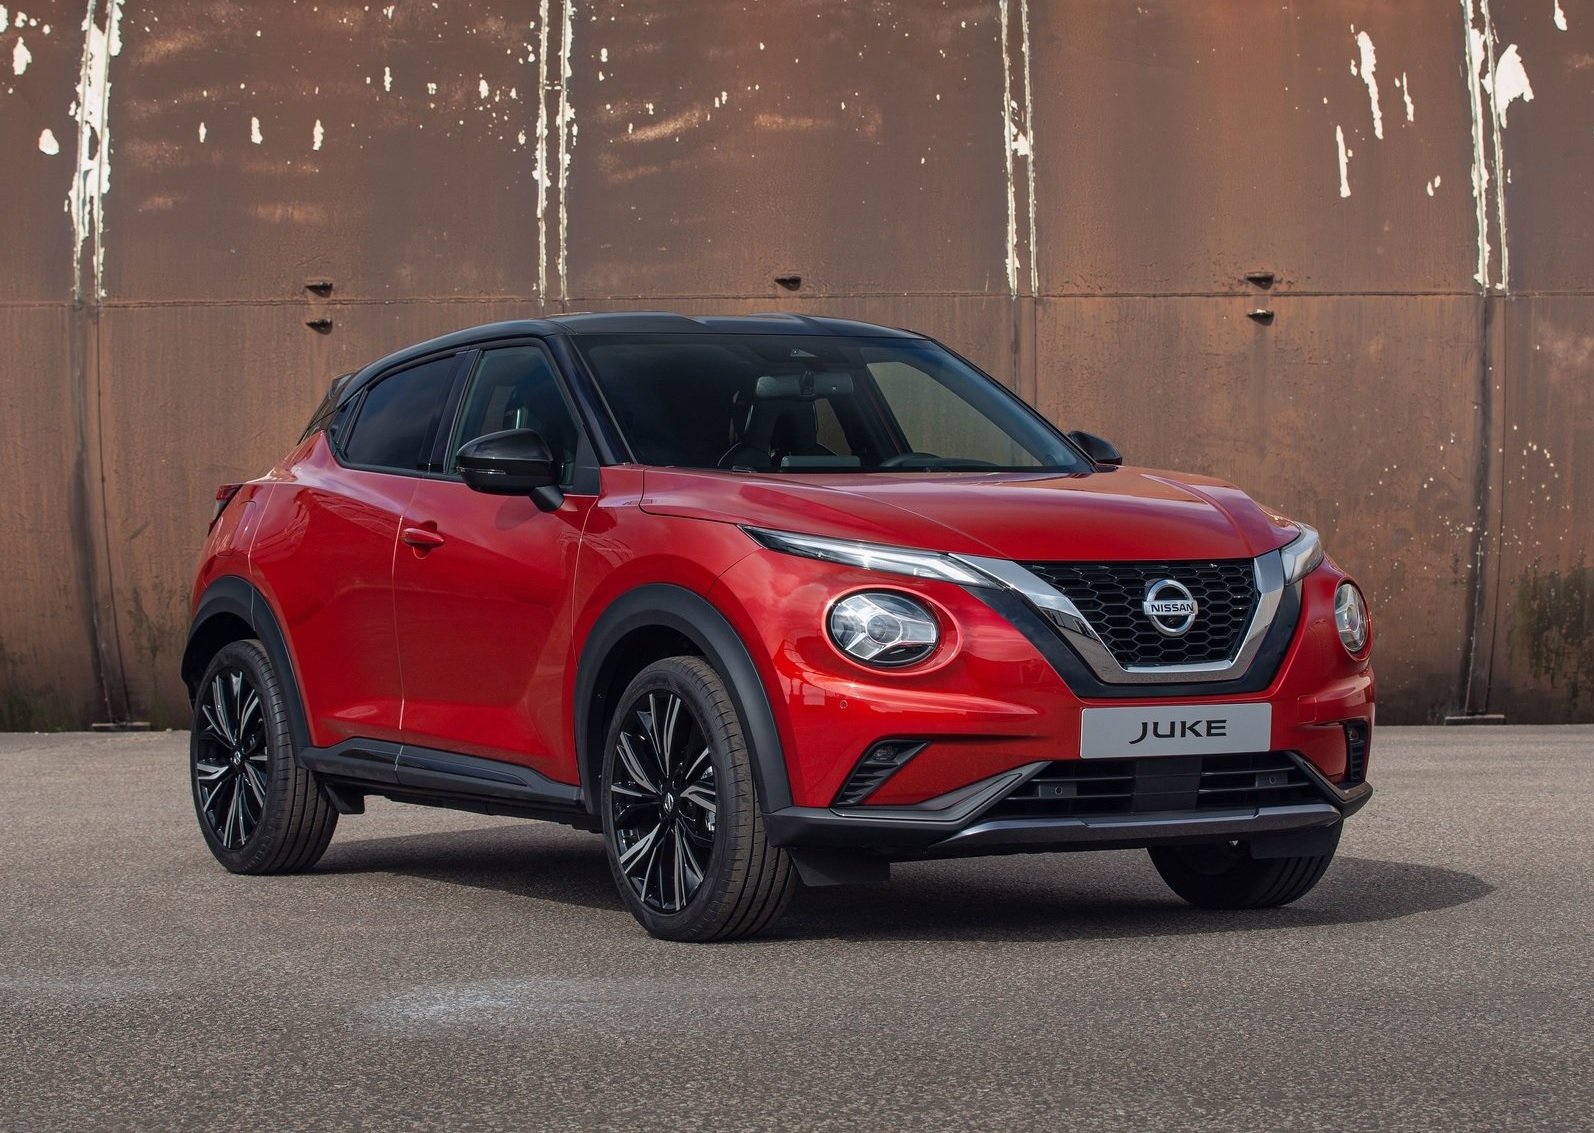 What Are Your Expectations For The Second Generation Nissan Juke Crossover?